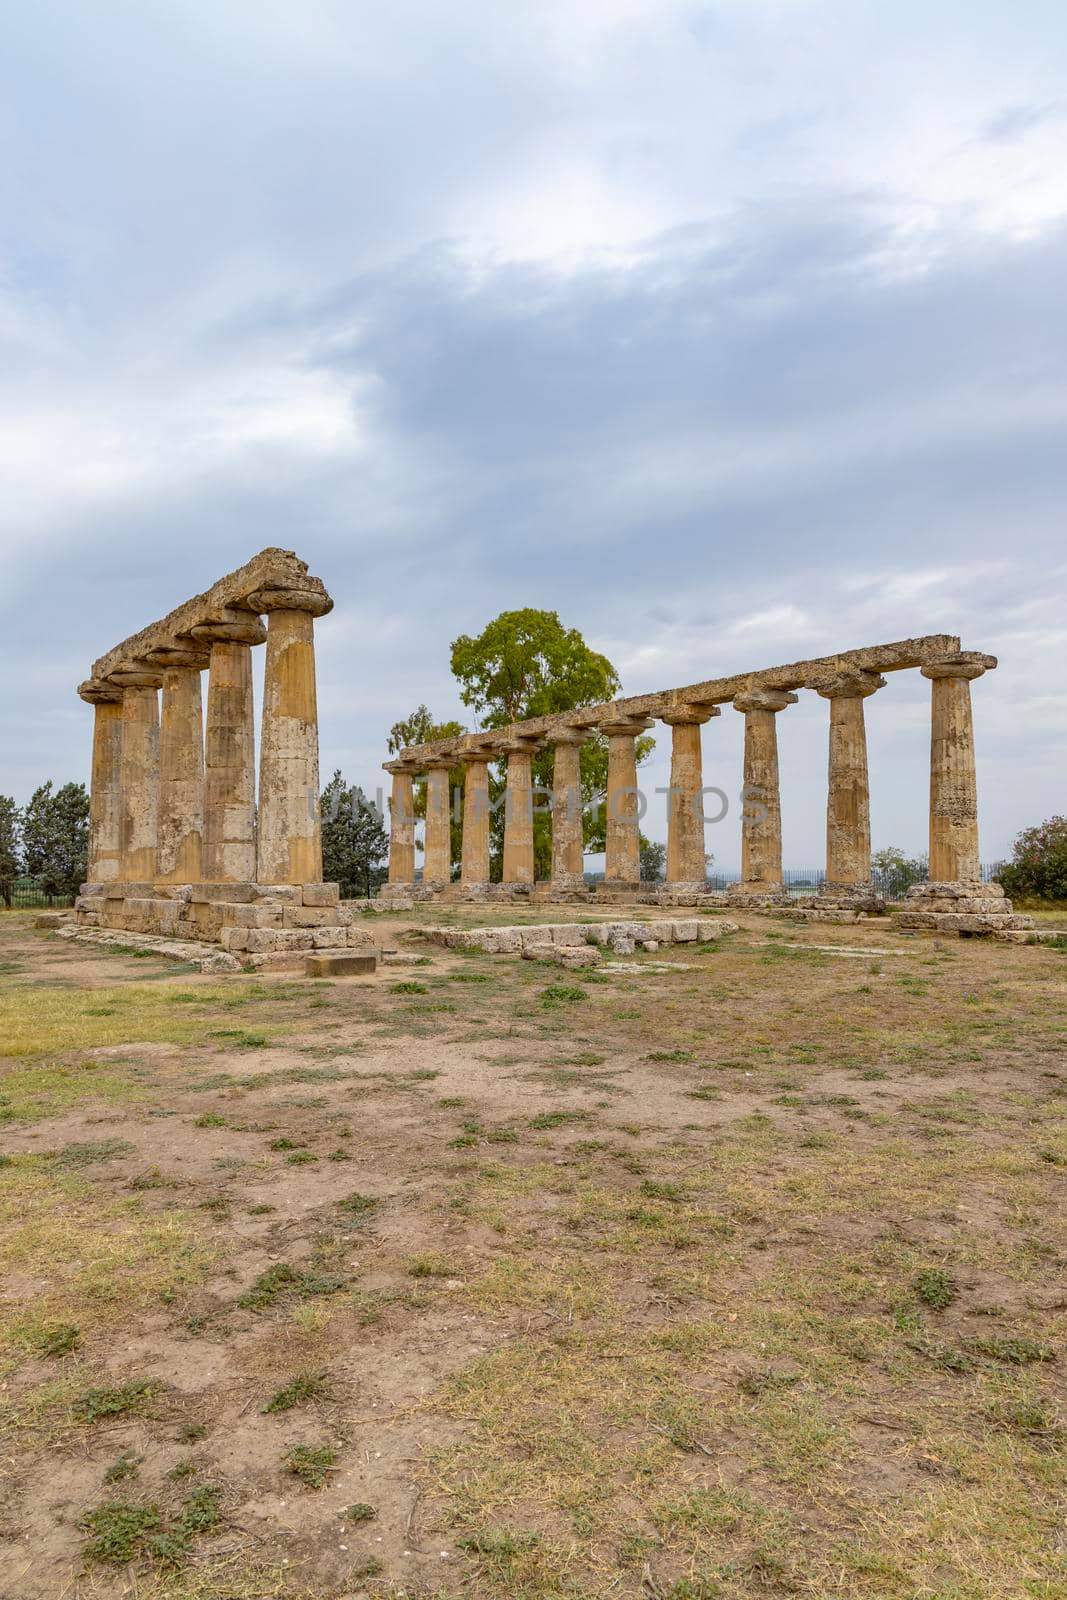 Temple of Hera from 6 century BC, archaeological site near Bernalda, Italy by phbcz